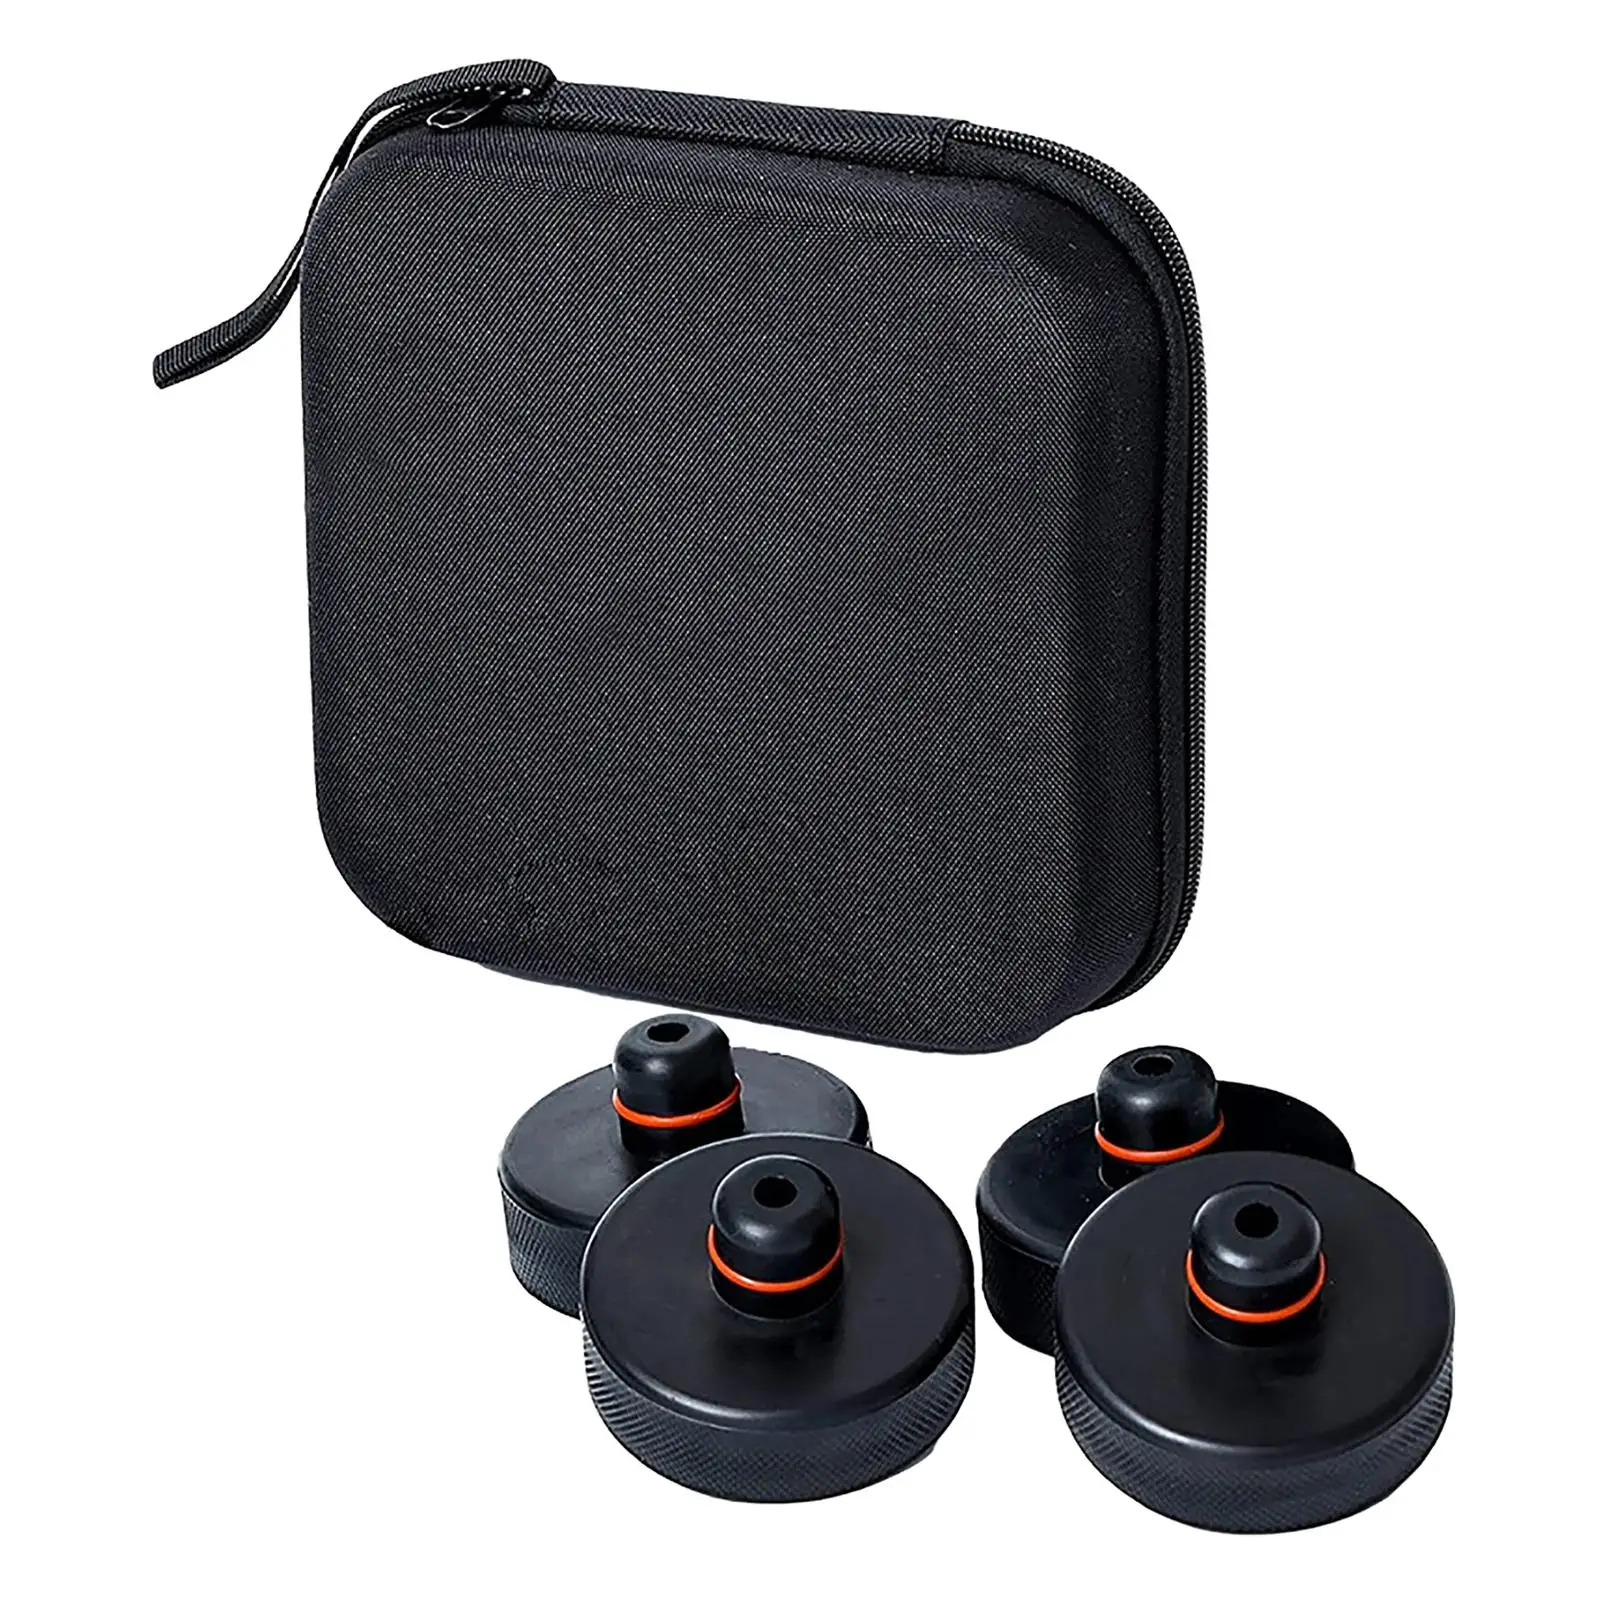 Car Jack Lift Pad Adapter Tool with Storage Case for Y ,Ensures Greater Stability ,Easy to Use Protection